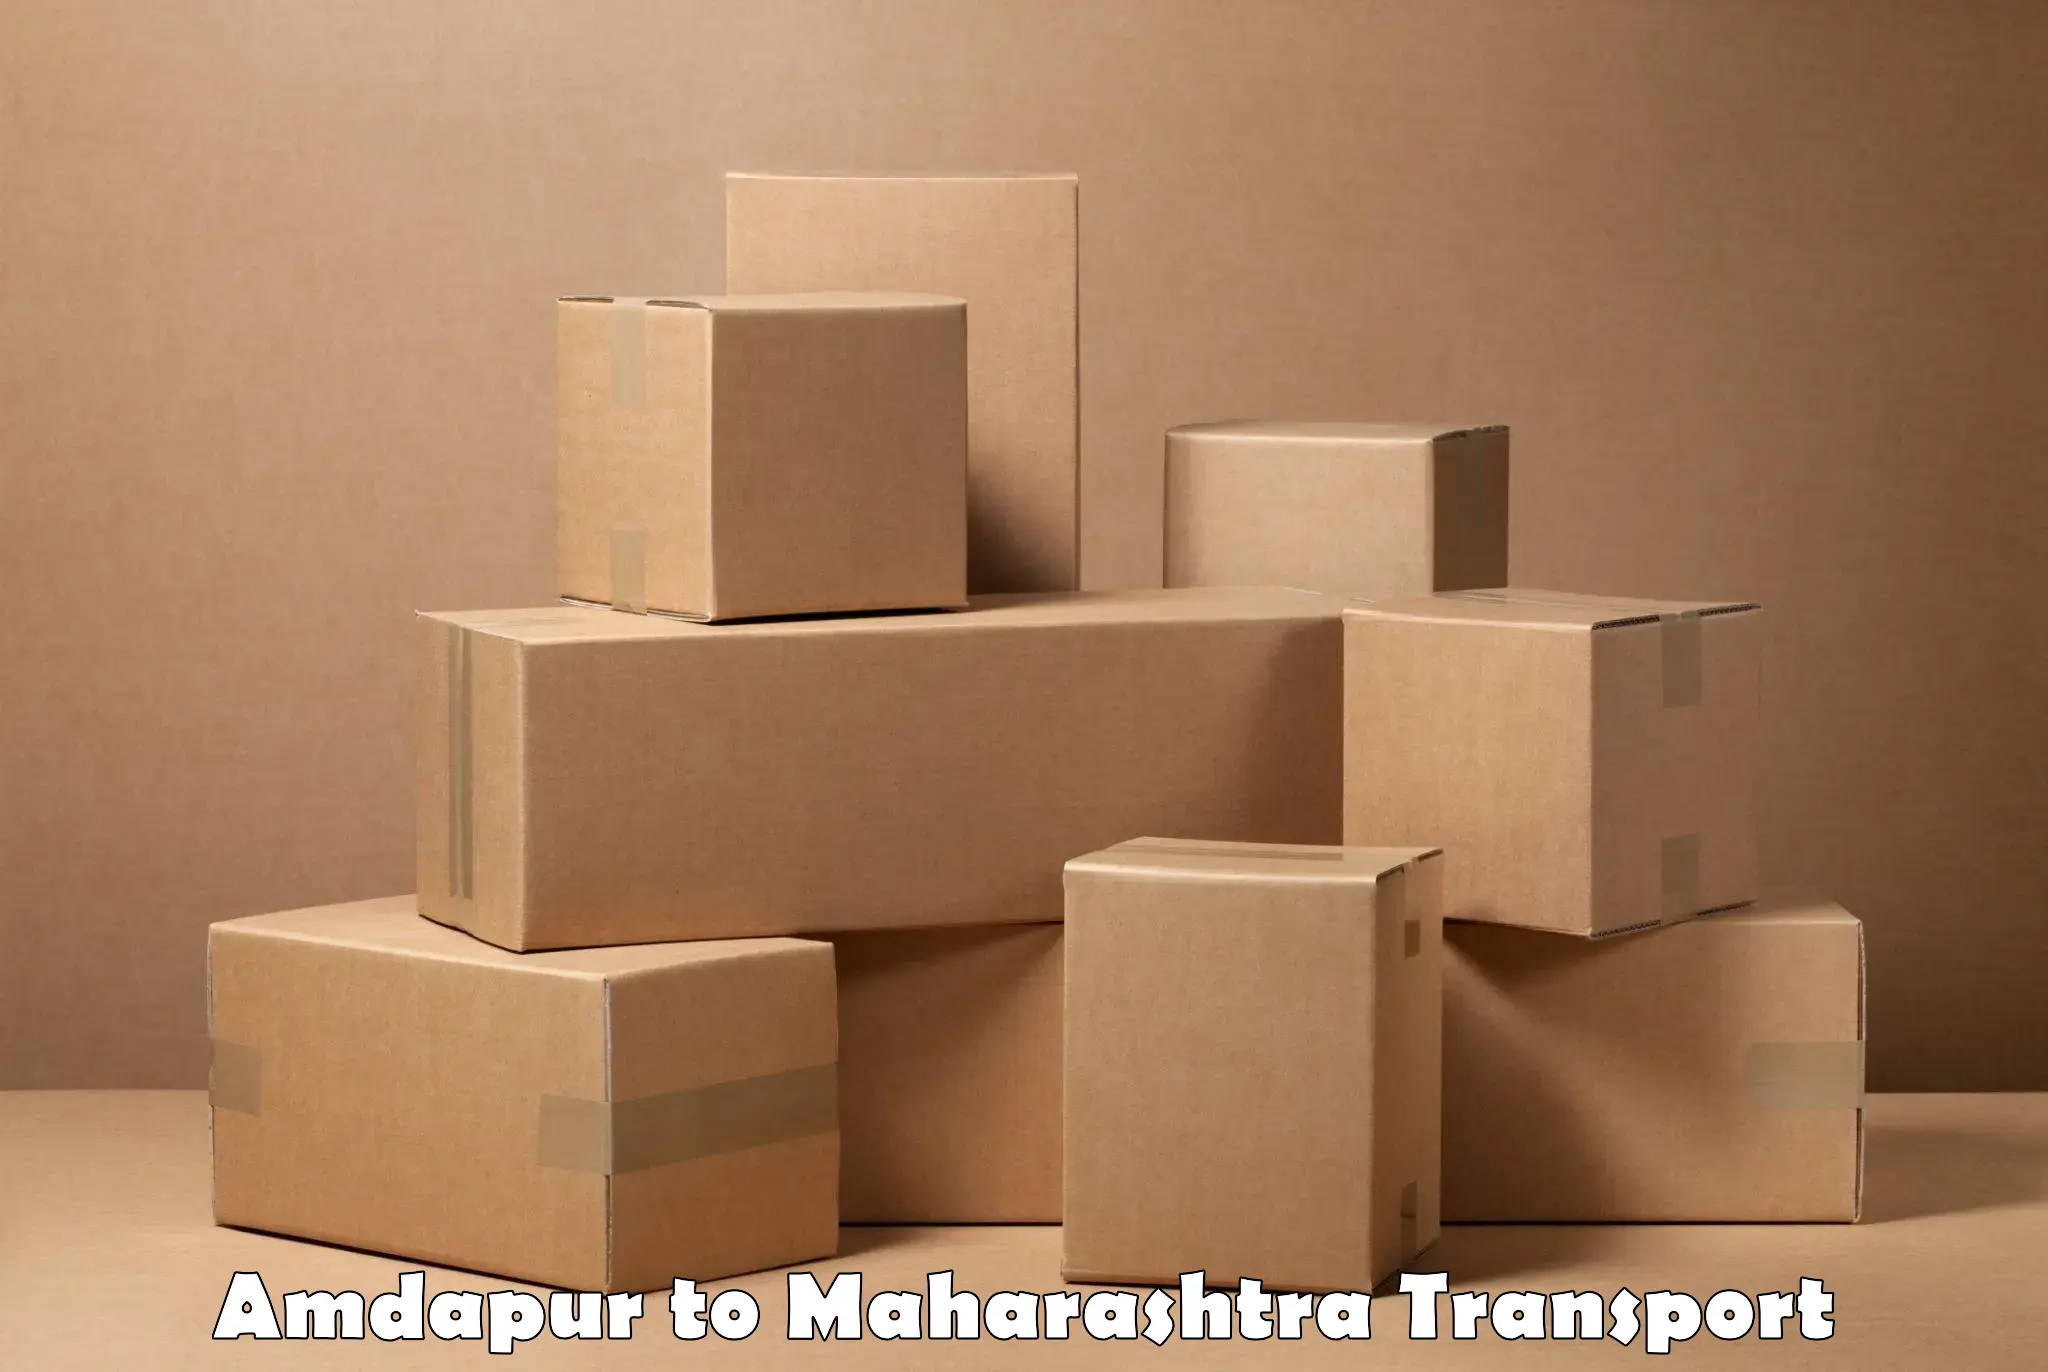 Air cargo transport services Amdapur to Alephata